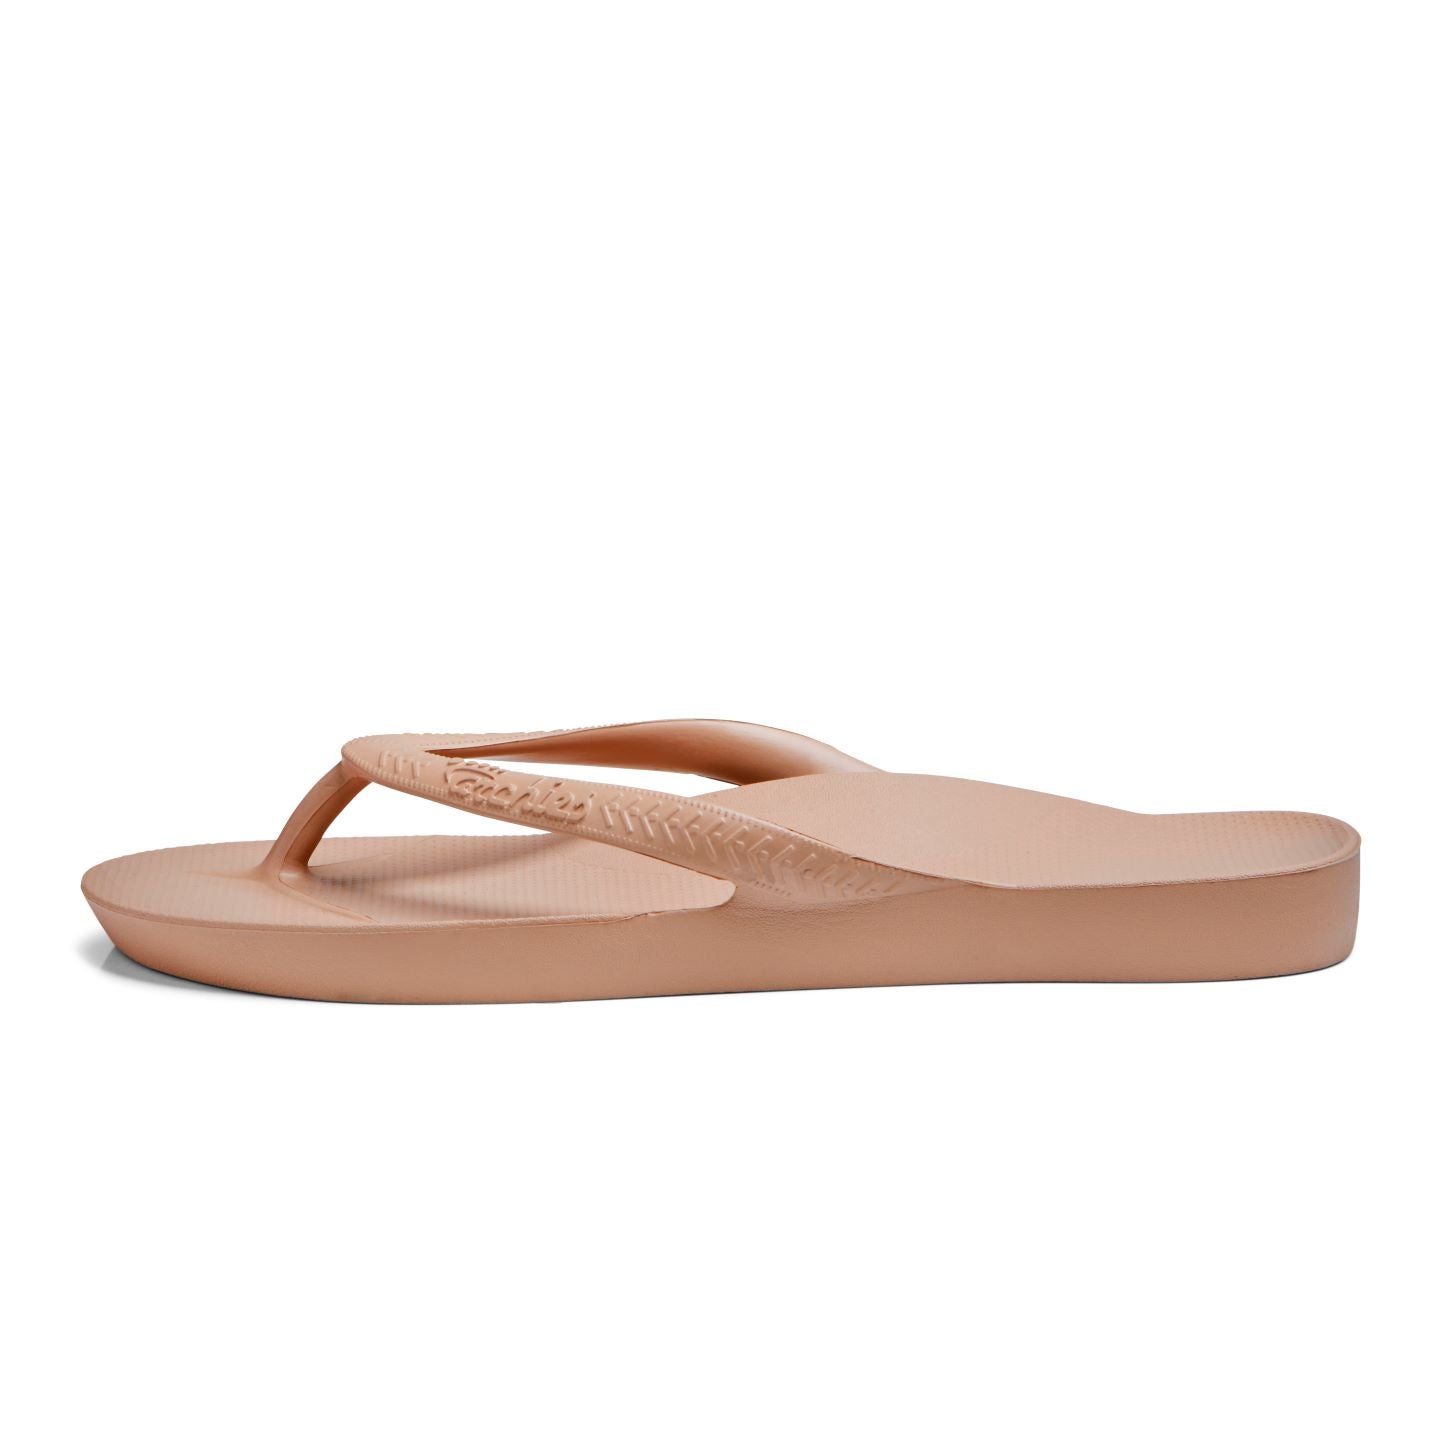 Archies Arch Support Flip Flops/Thongs - Tan